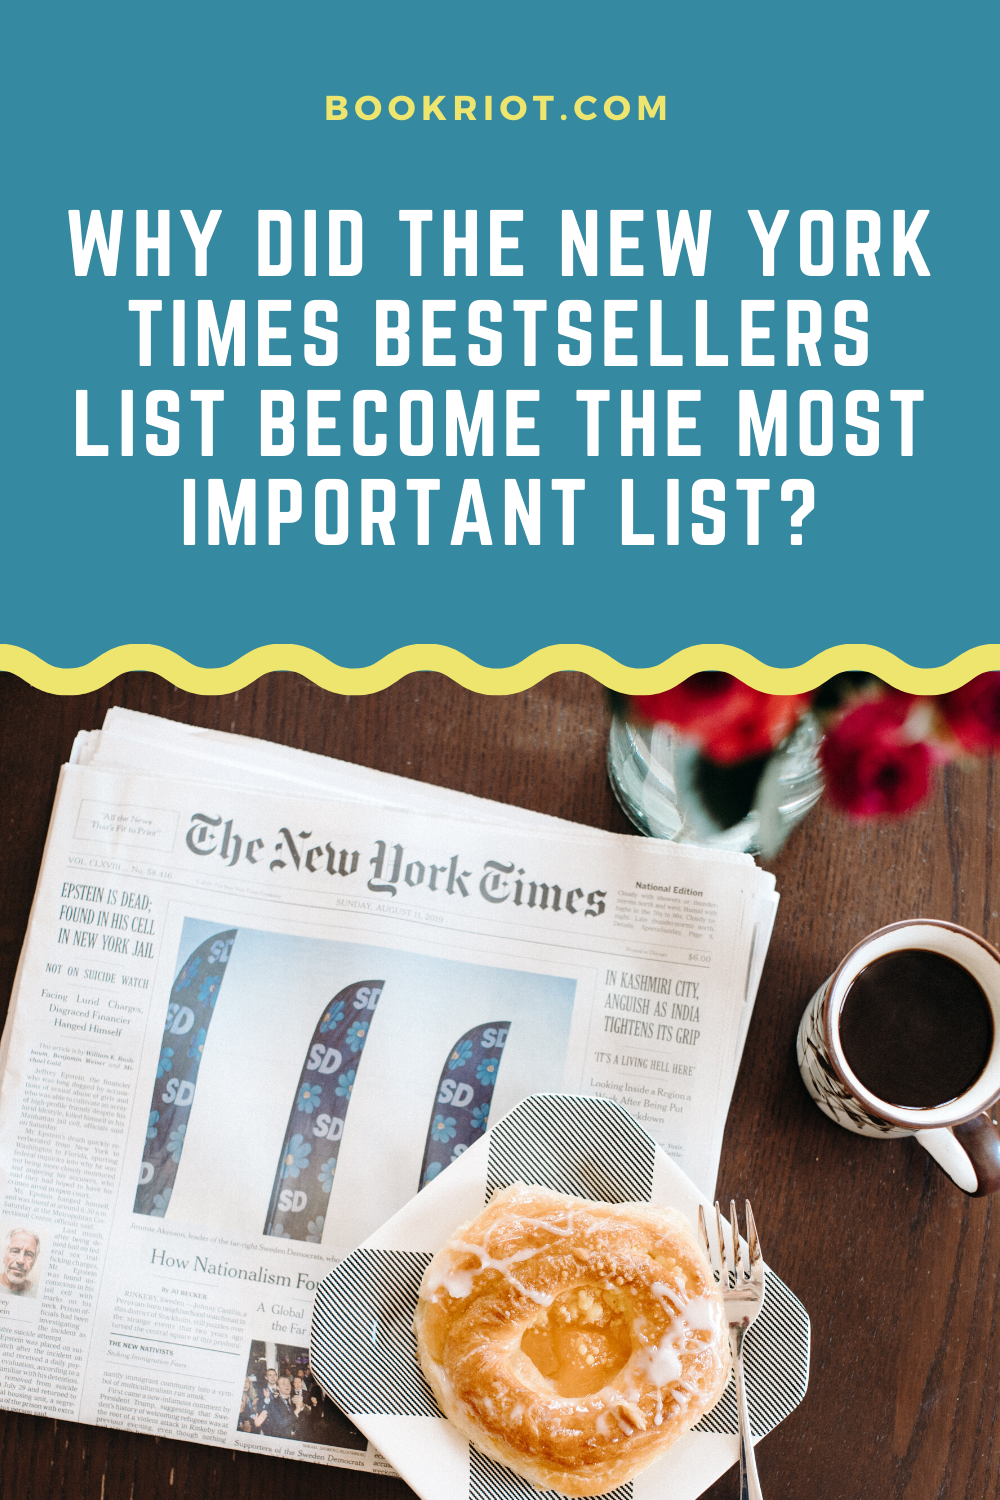 Why Did The New York Times Bestsellers List THE List?